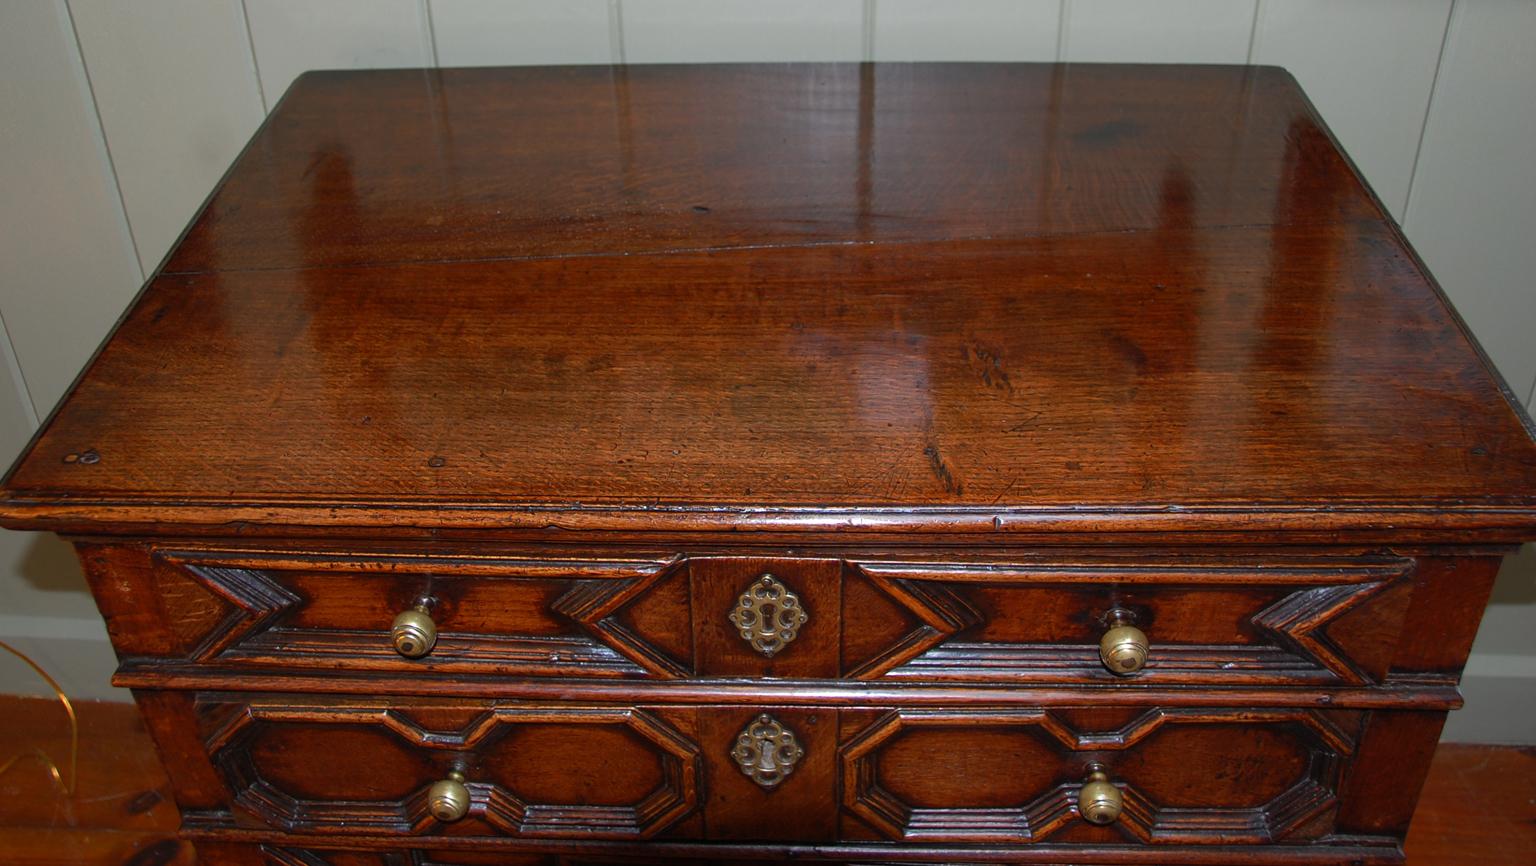 English 17th century William and Mary period oak paneled chest of four graduated drawers, deep patination, never refinished, bold moldings to drawers. The original side rails upon which the drawers originally ran have been replaced, as have the bun